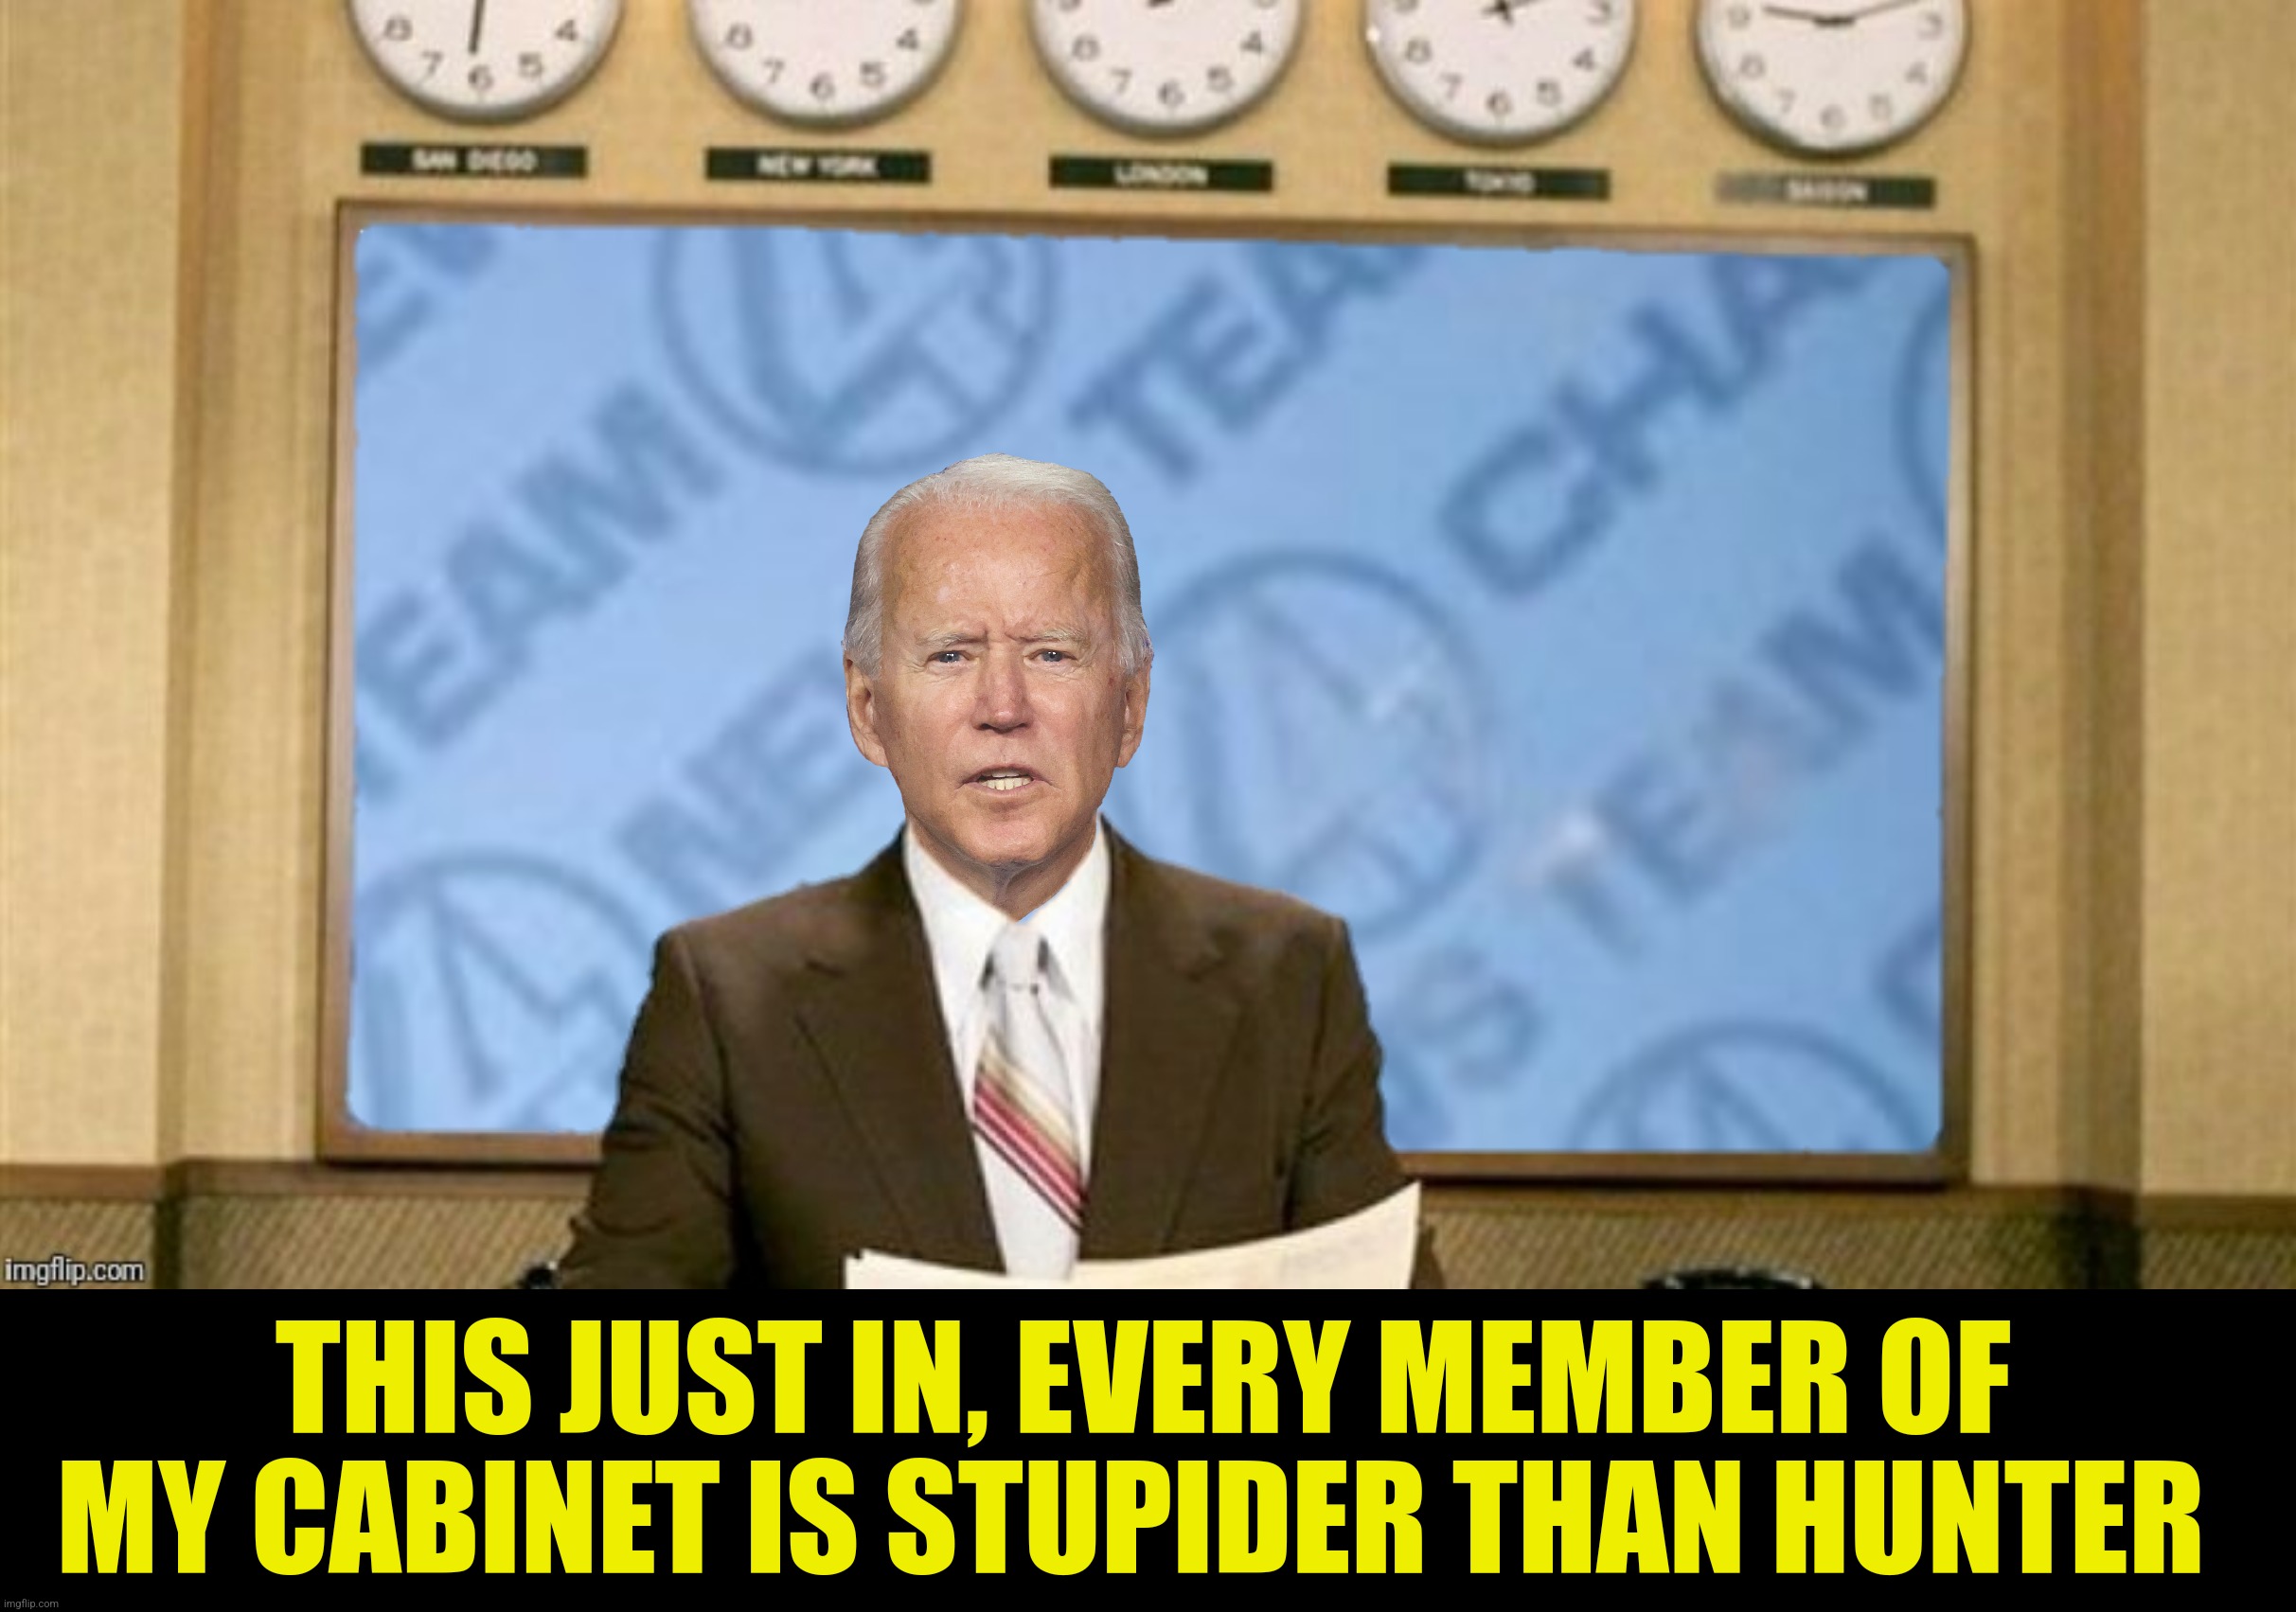 THIS JUST IN, EVERY MEMBER OF MY CABINET IS STUPIDER THAN HUNTER | made w/ Imgflip meme maker